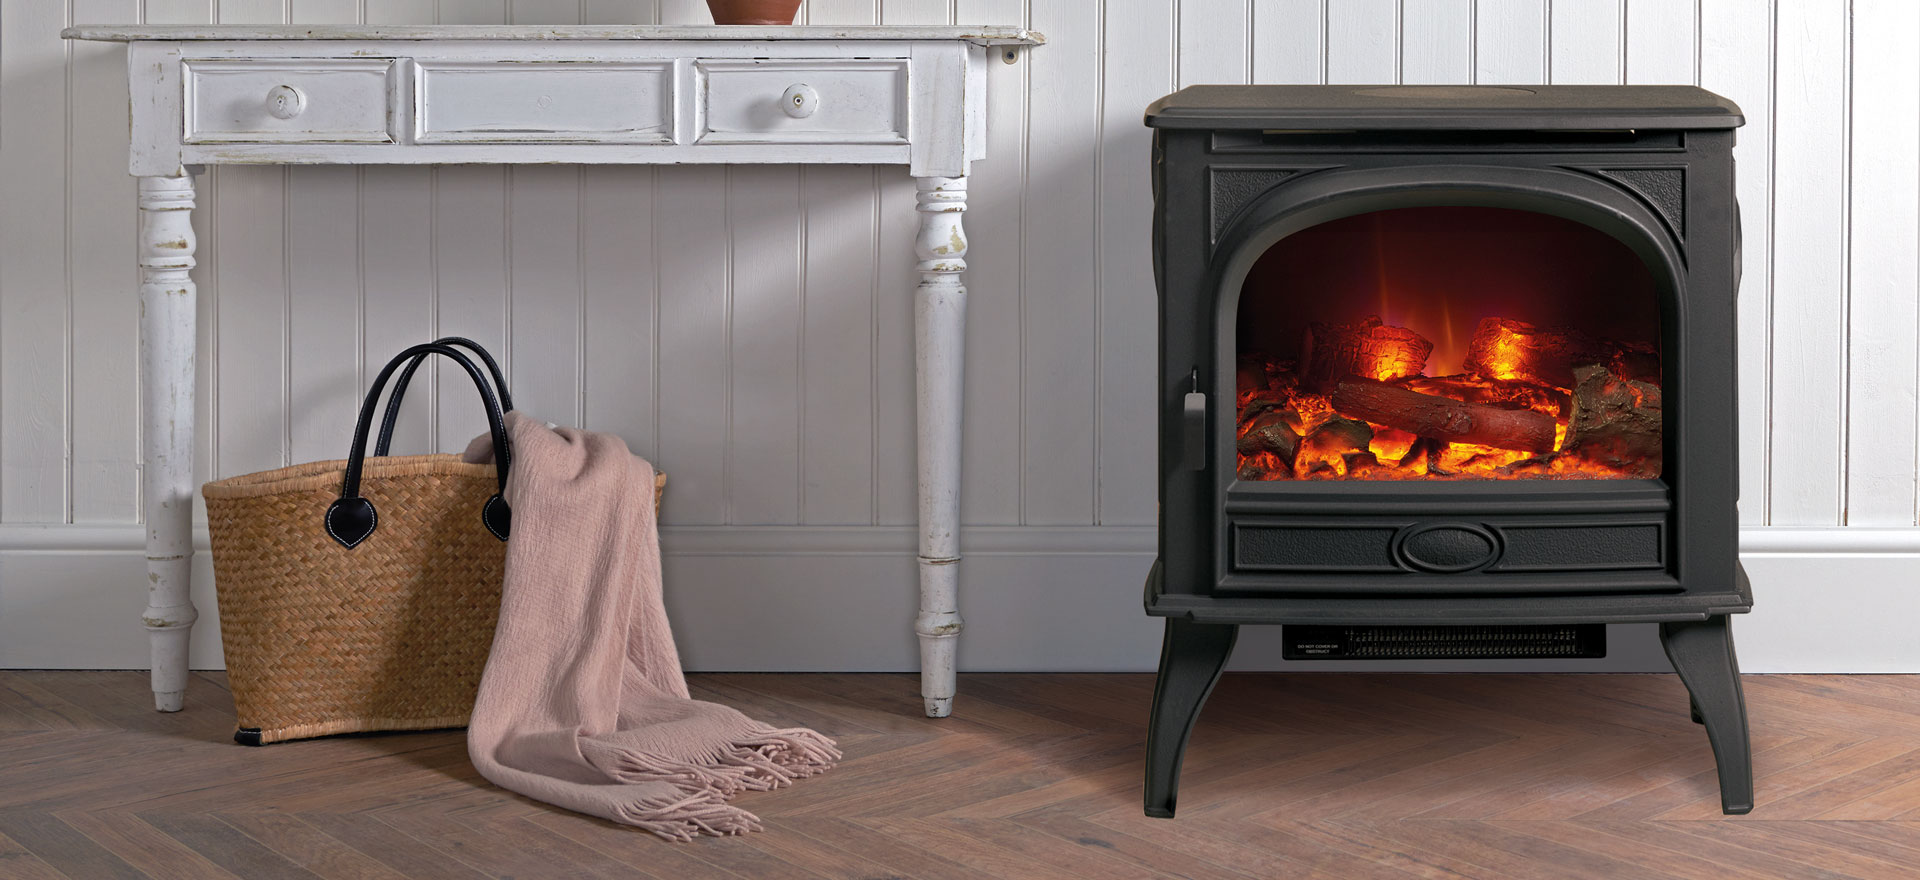 Why Choose a Dovre Cast Iron Electric Stove?